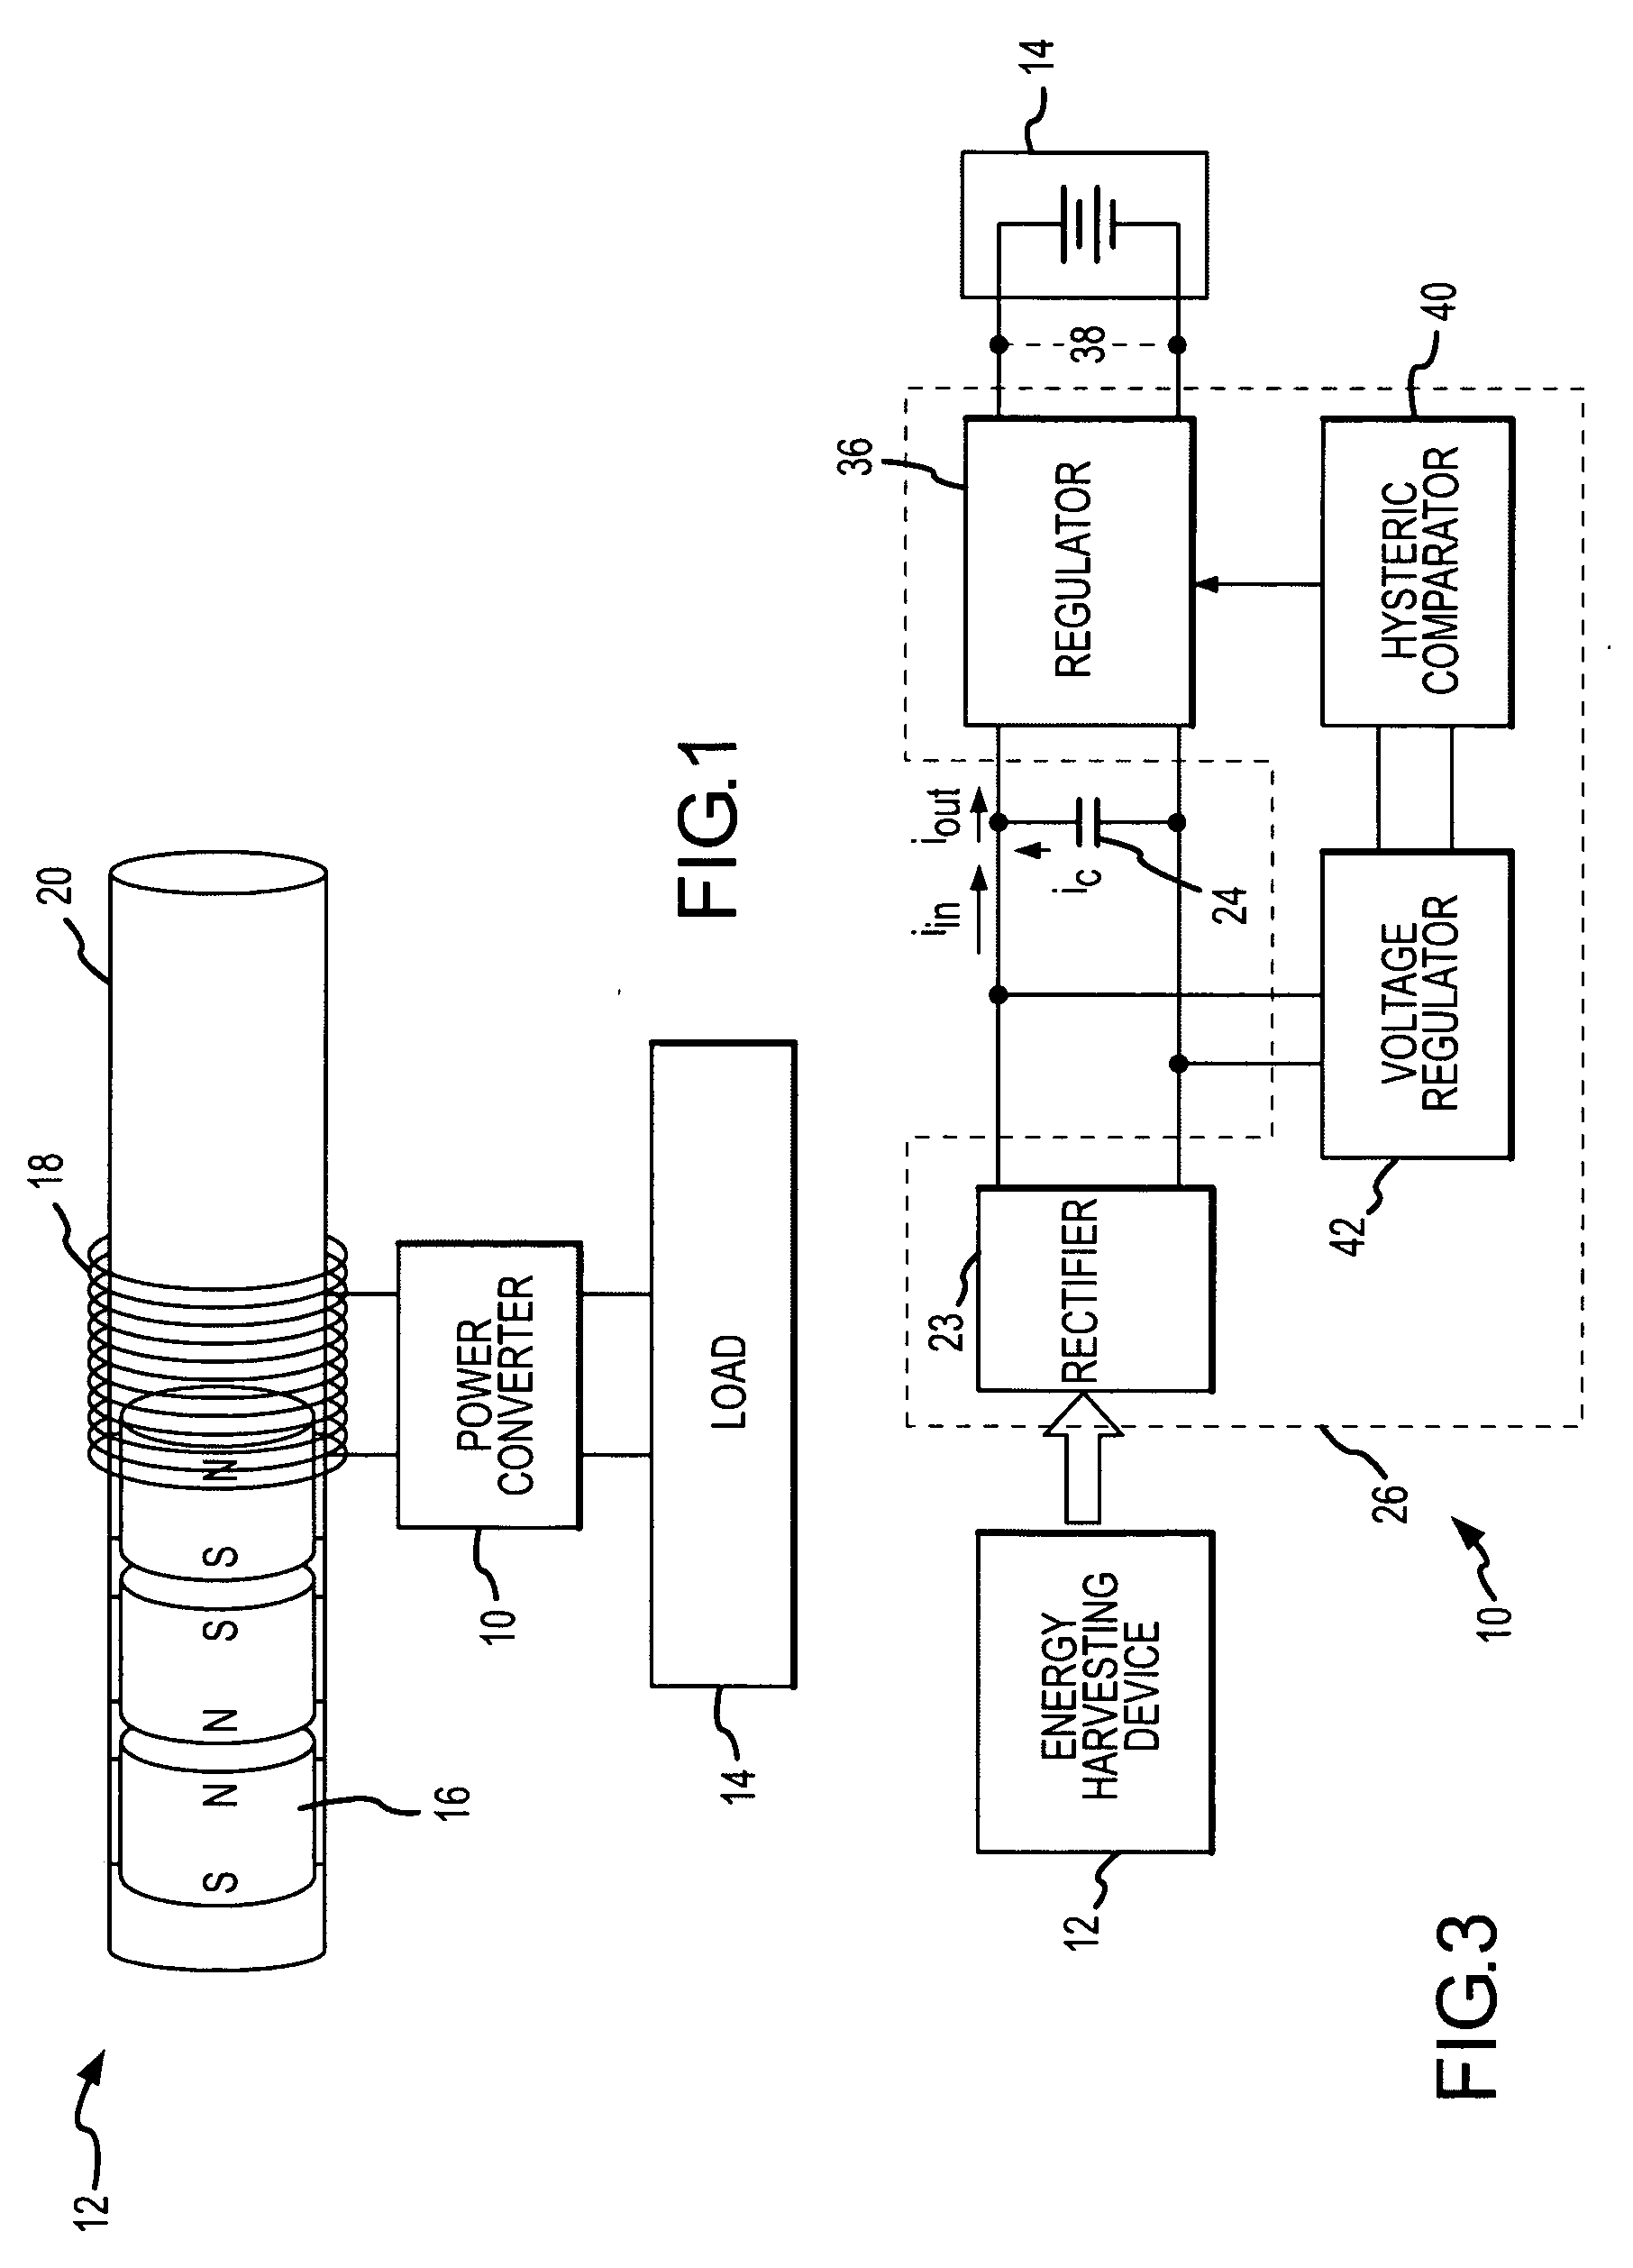 High efficiency power converter for energy harvesting devices